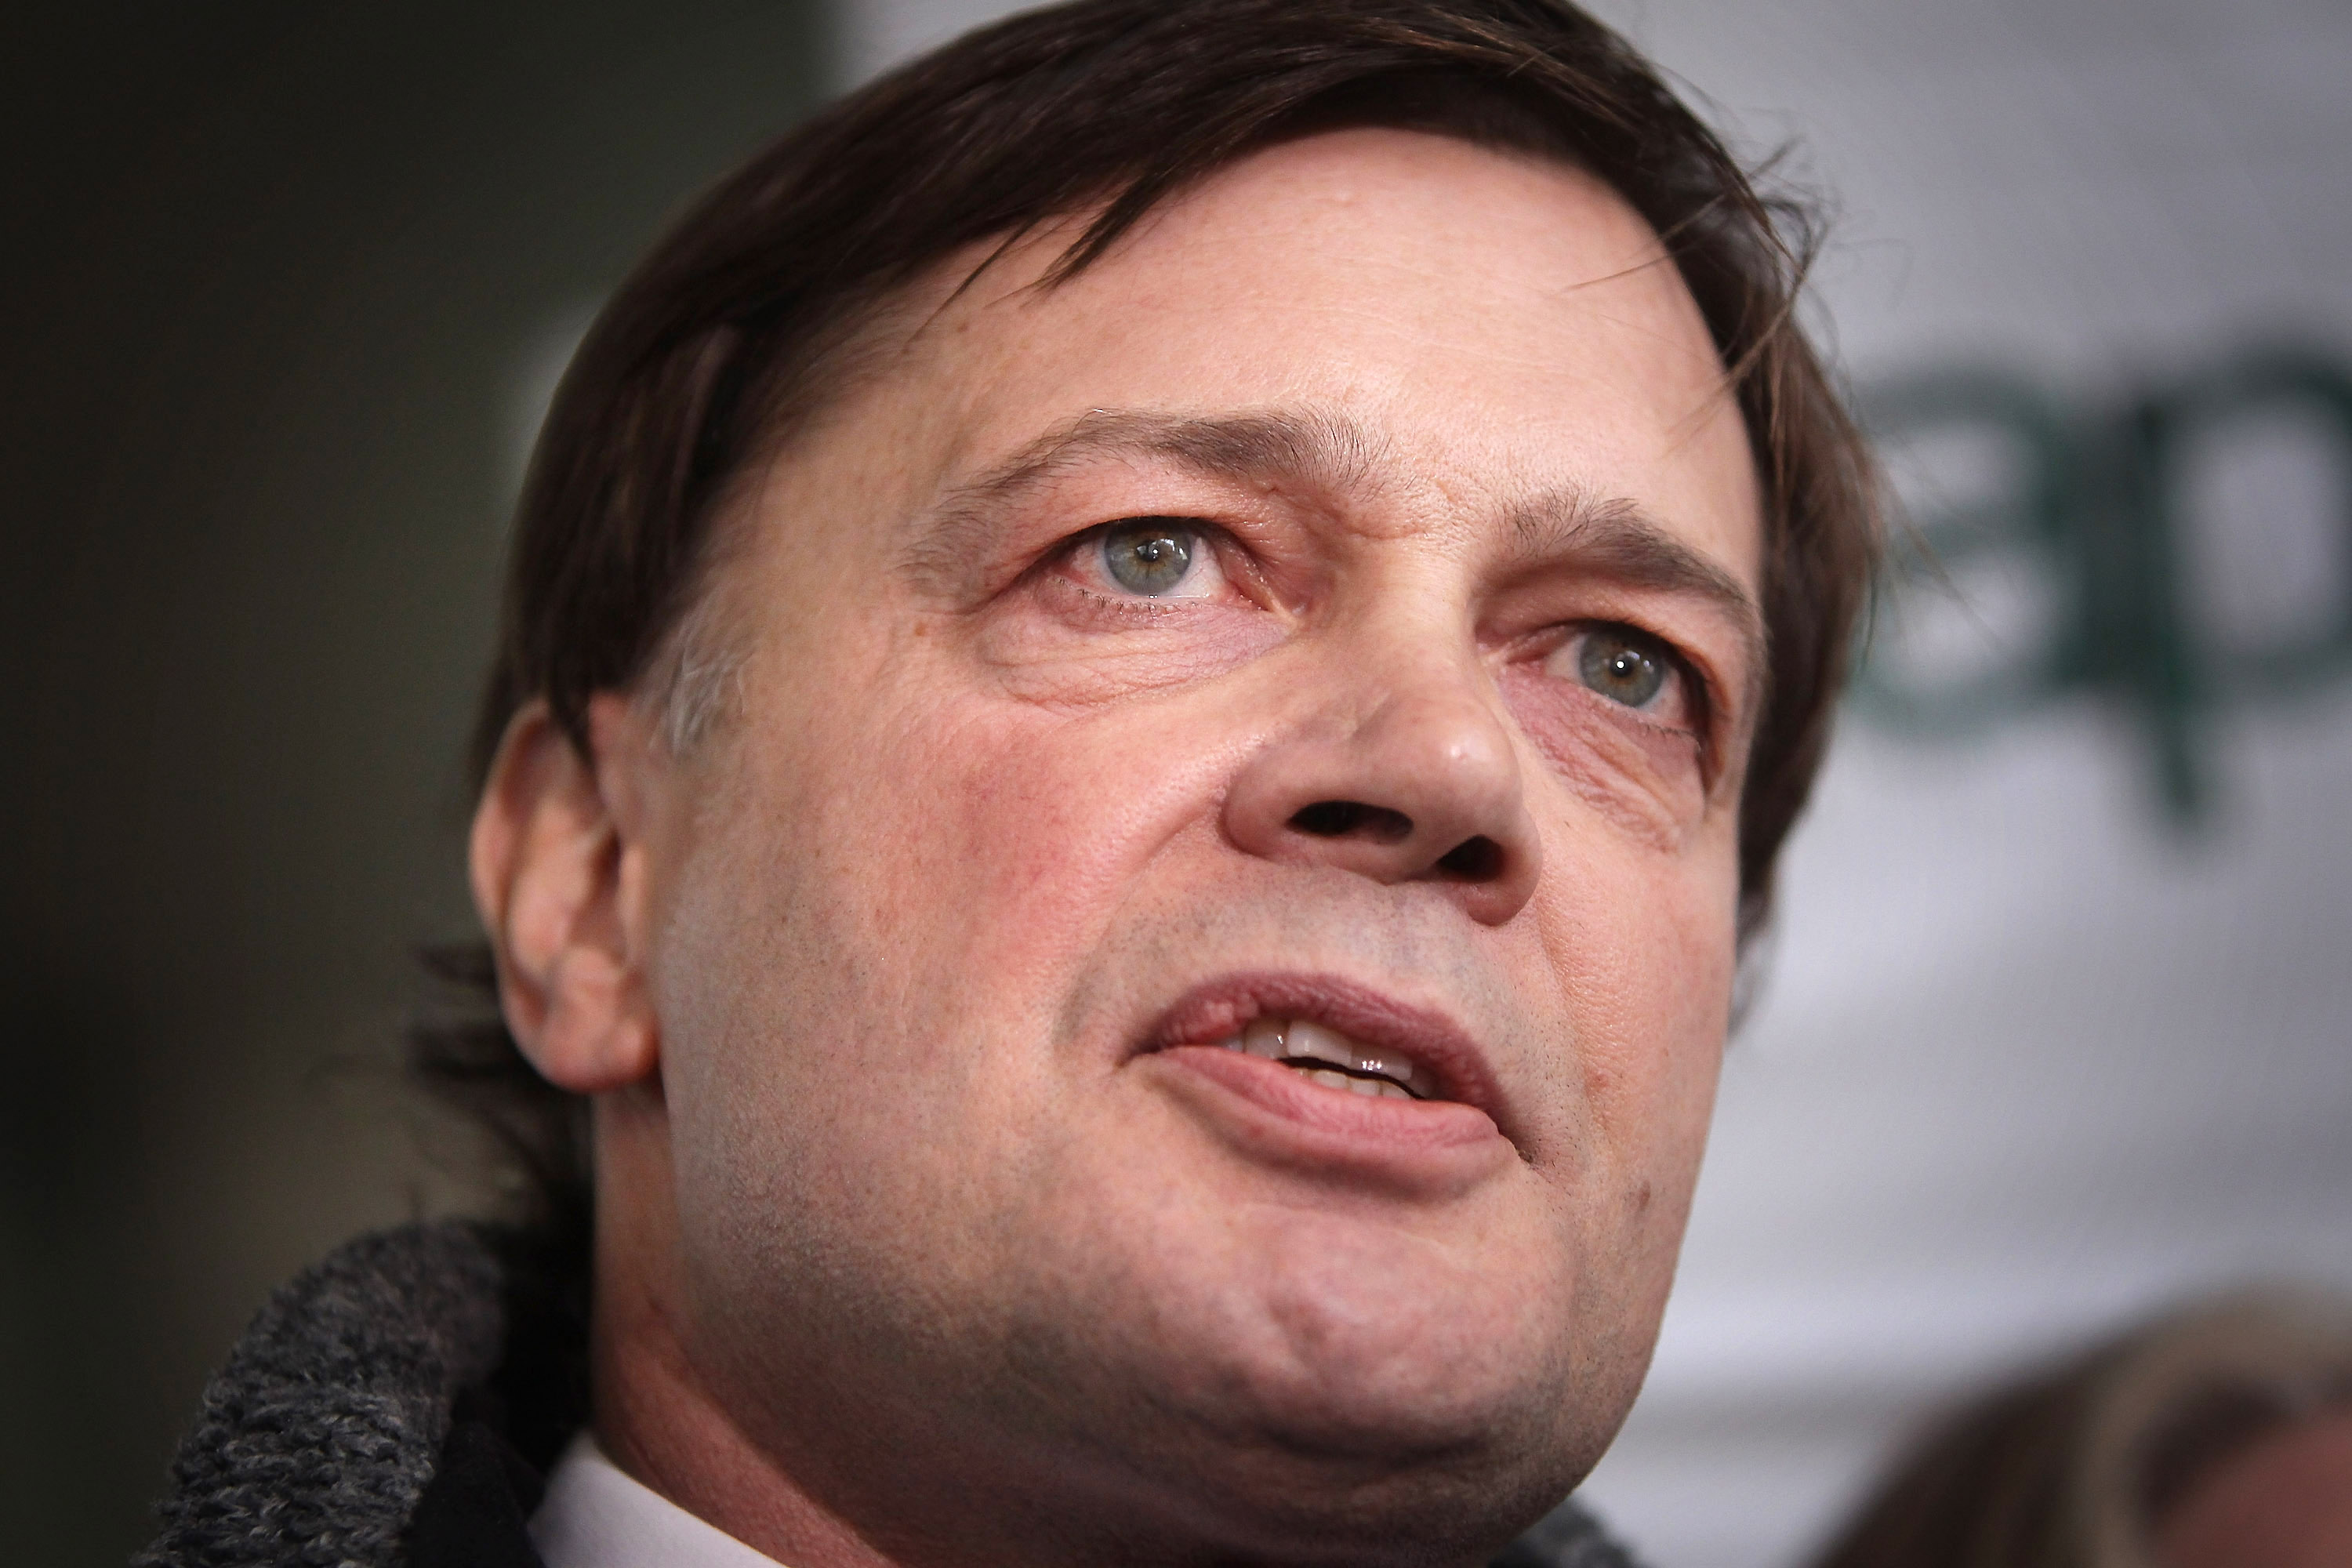 Dr. Andrew Wakefield talks to reporters outside the General Medical Council on Jan. 28, 2010 in London, England (Peter Macdiarmid—Getty Images)